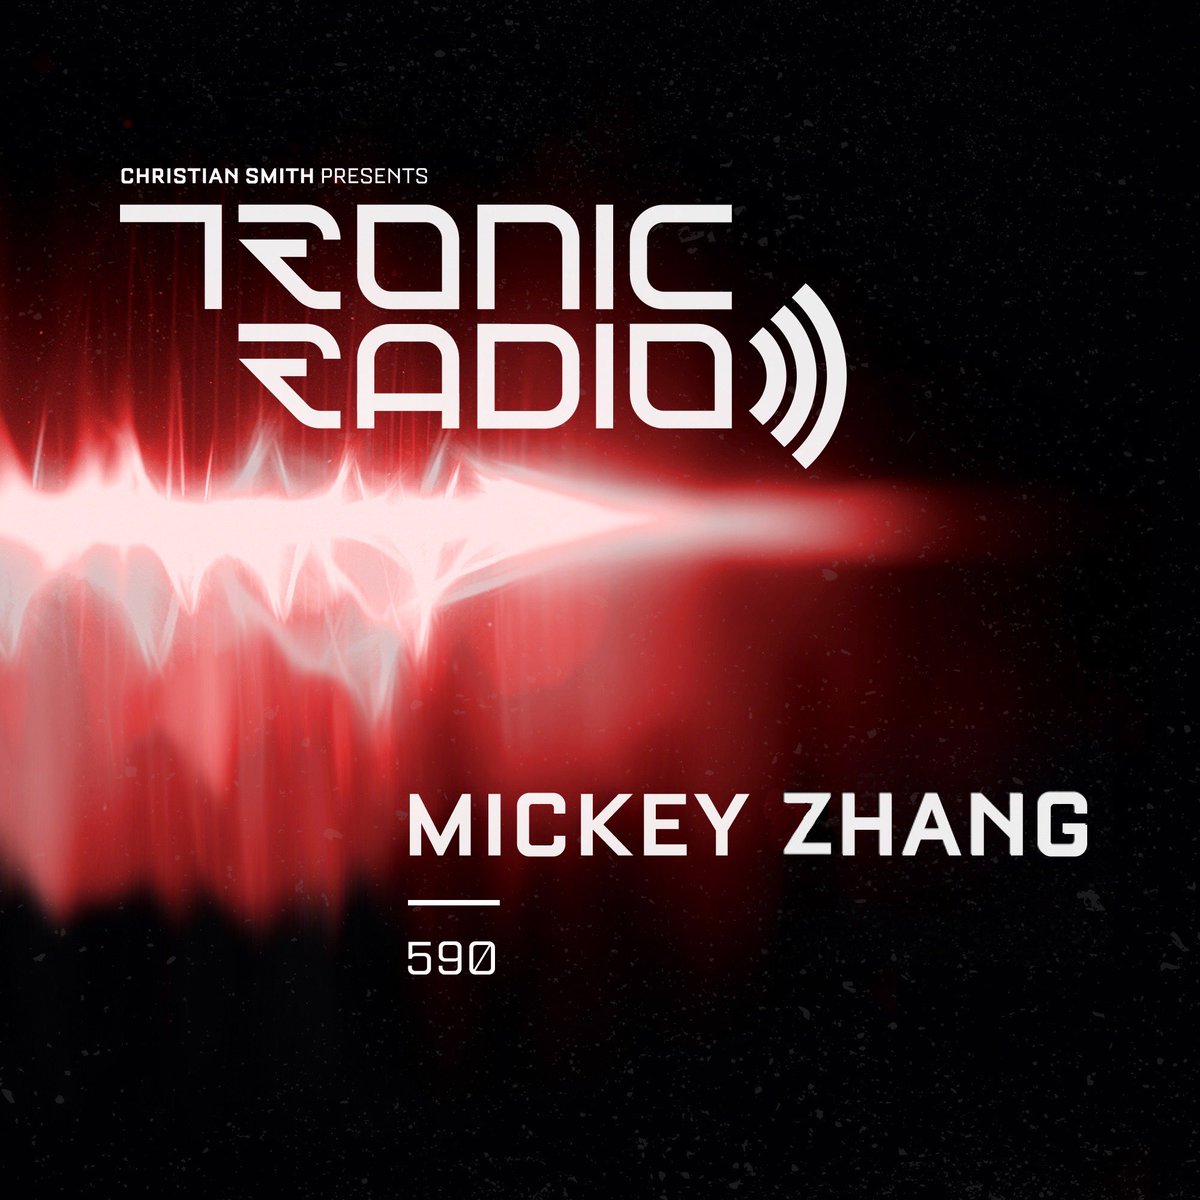 ⚠️NEW MIX⚠️ Tronic Podcast 590 with Mickey Zhang hosted by @CSmithLIVE on.soundcloud.com/32rvjLPeEDLinM…